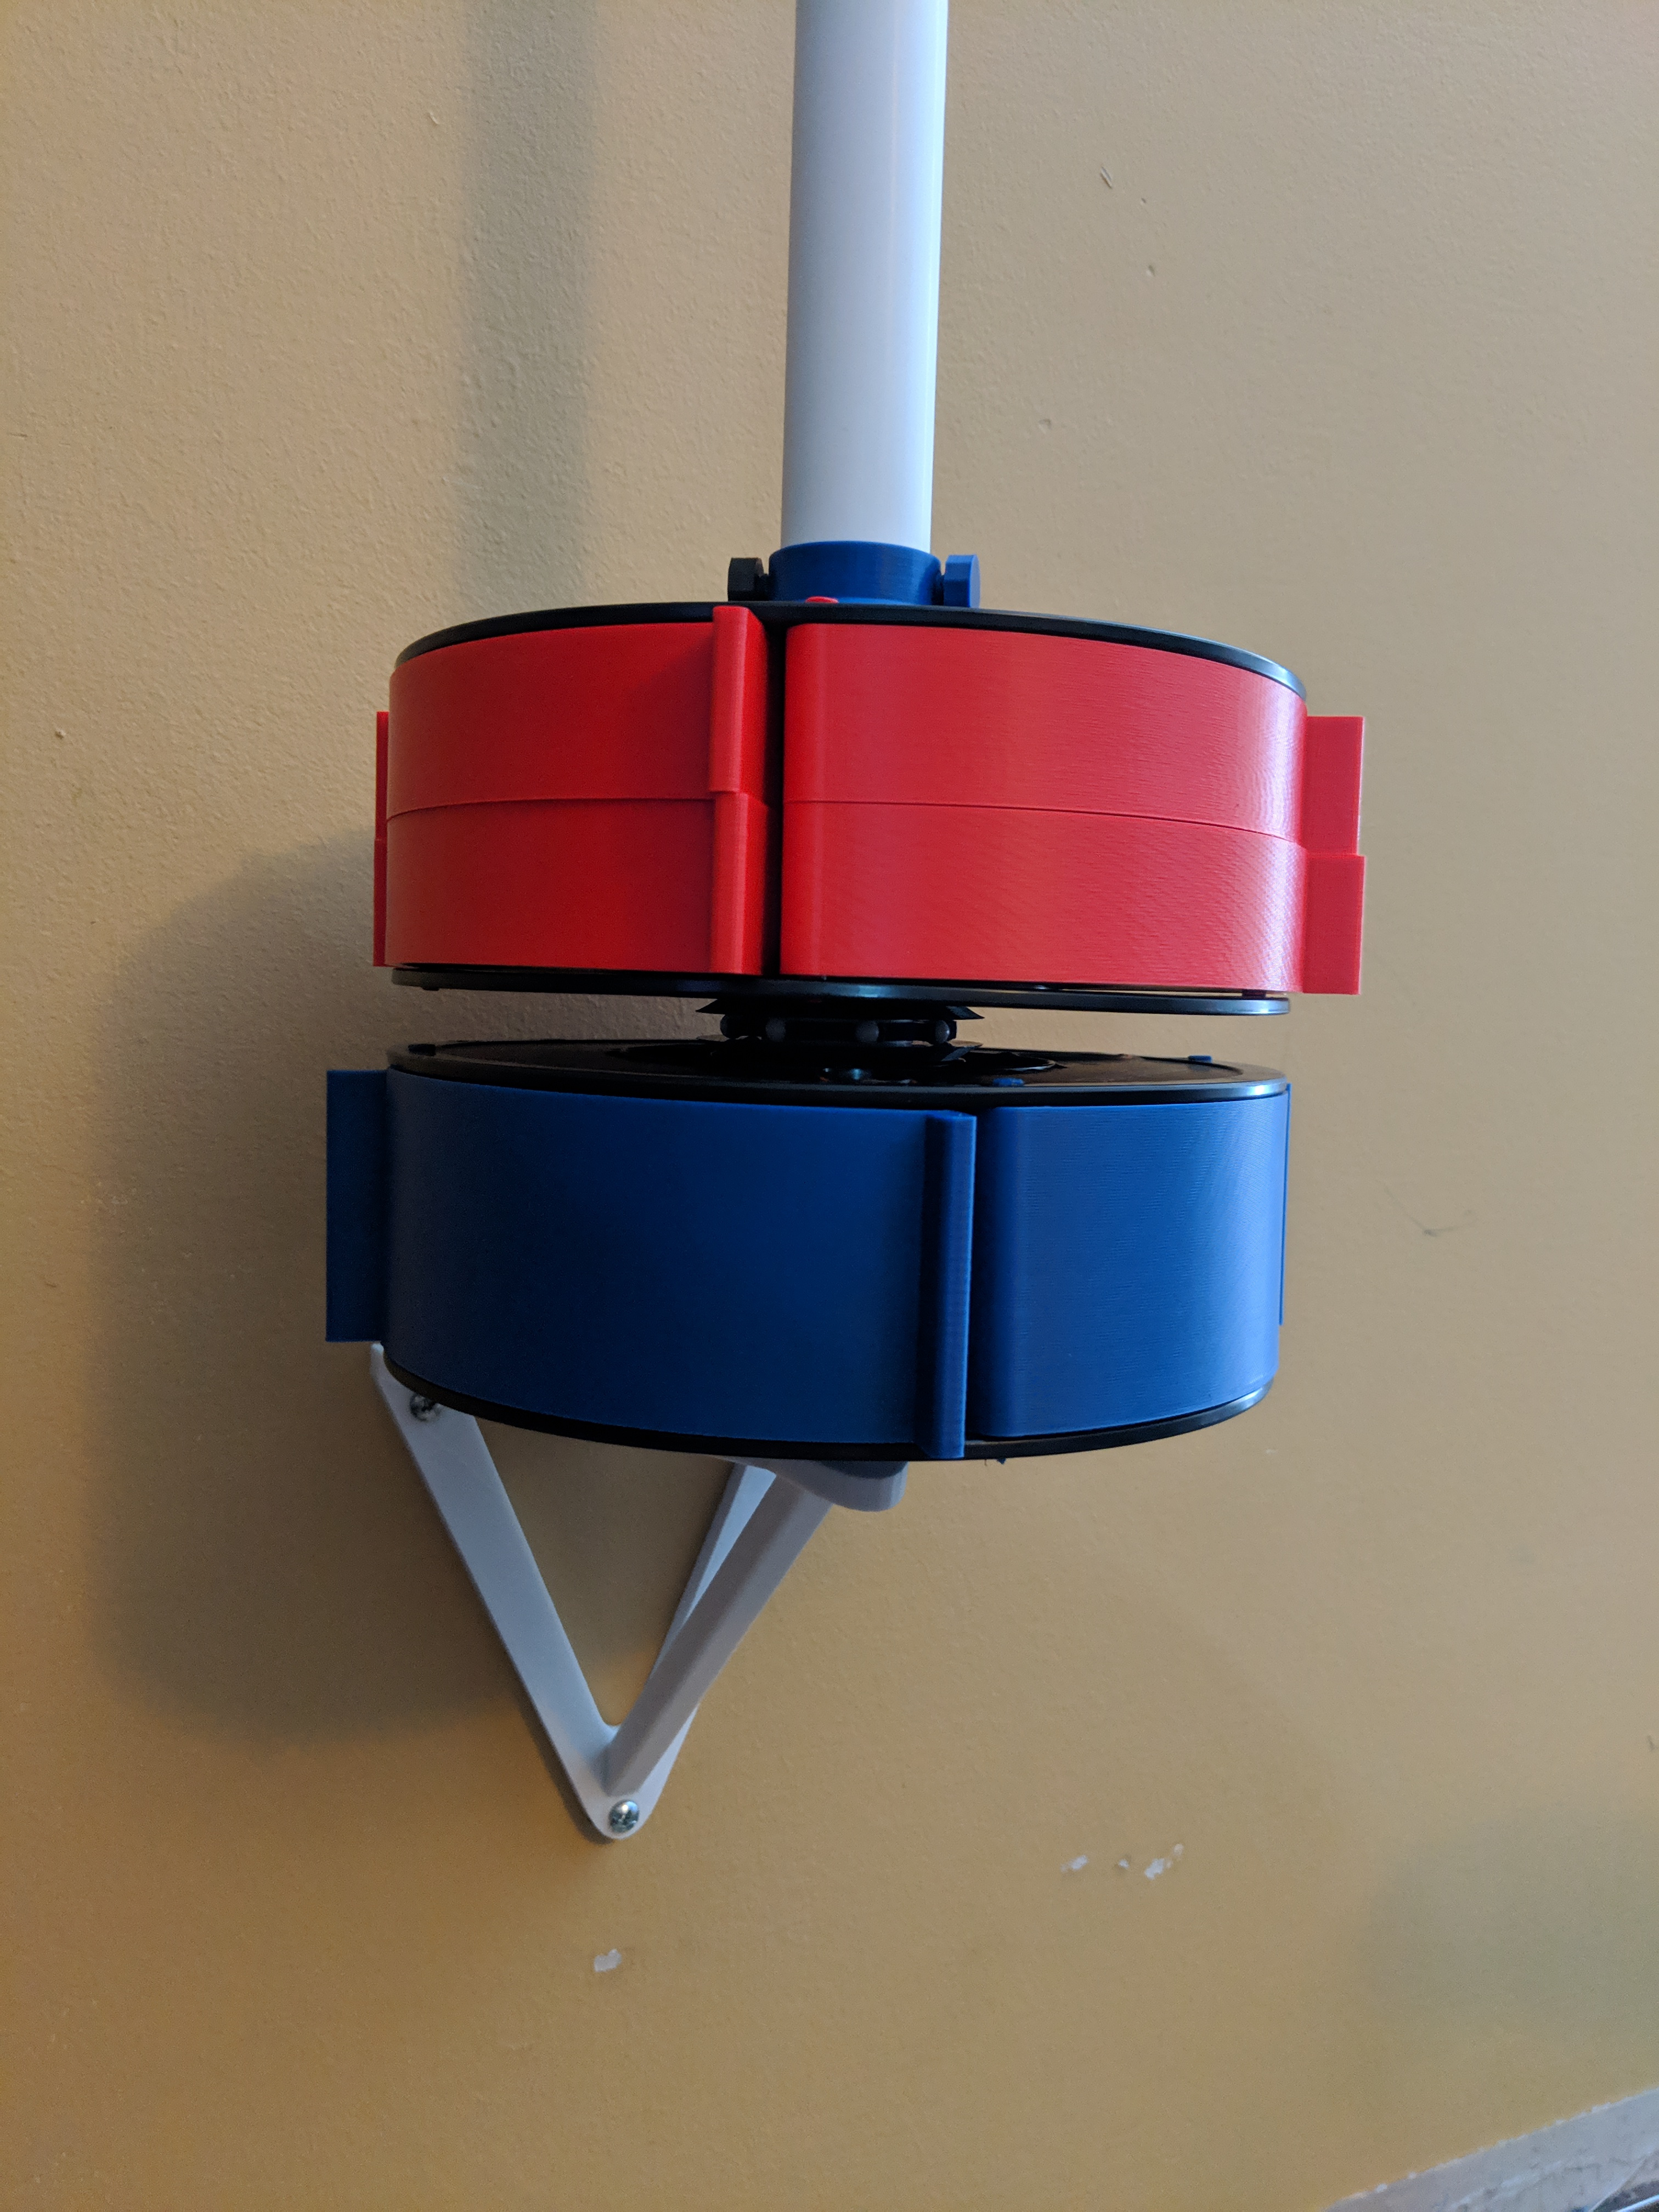 Vertical PVC Pipe Wall Mount for Used Filament Spools Converted to Drawers